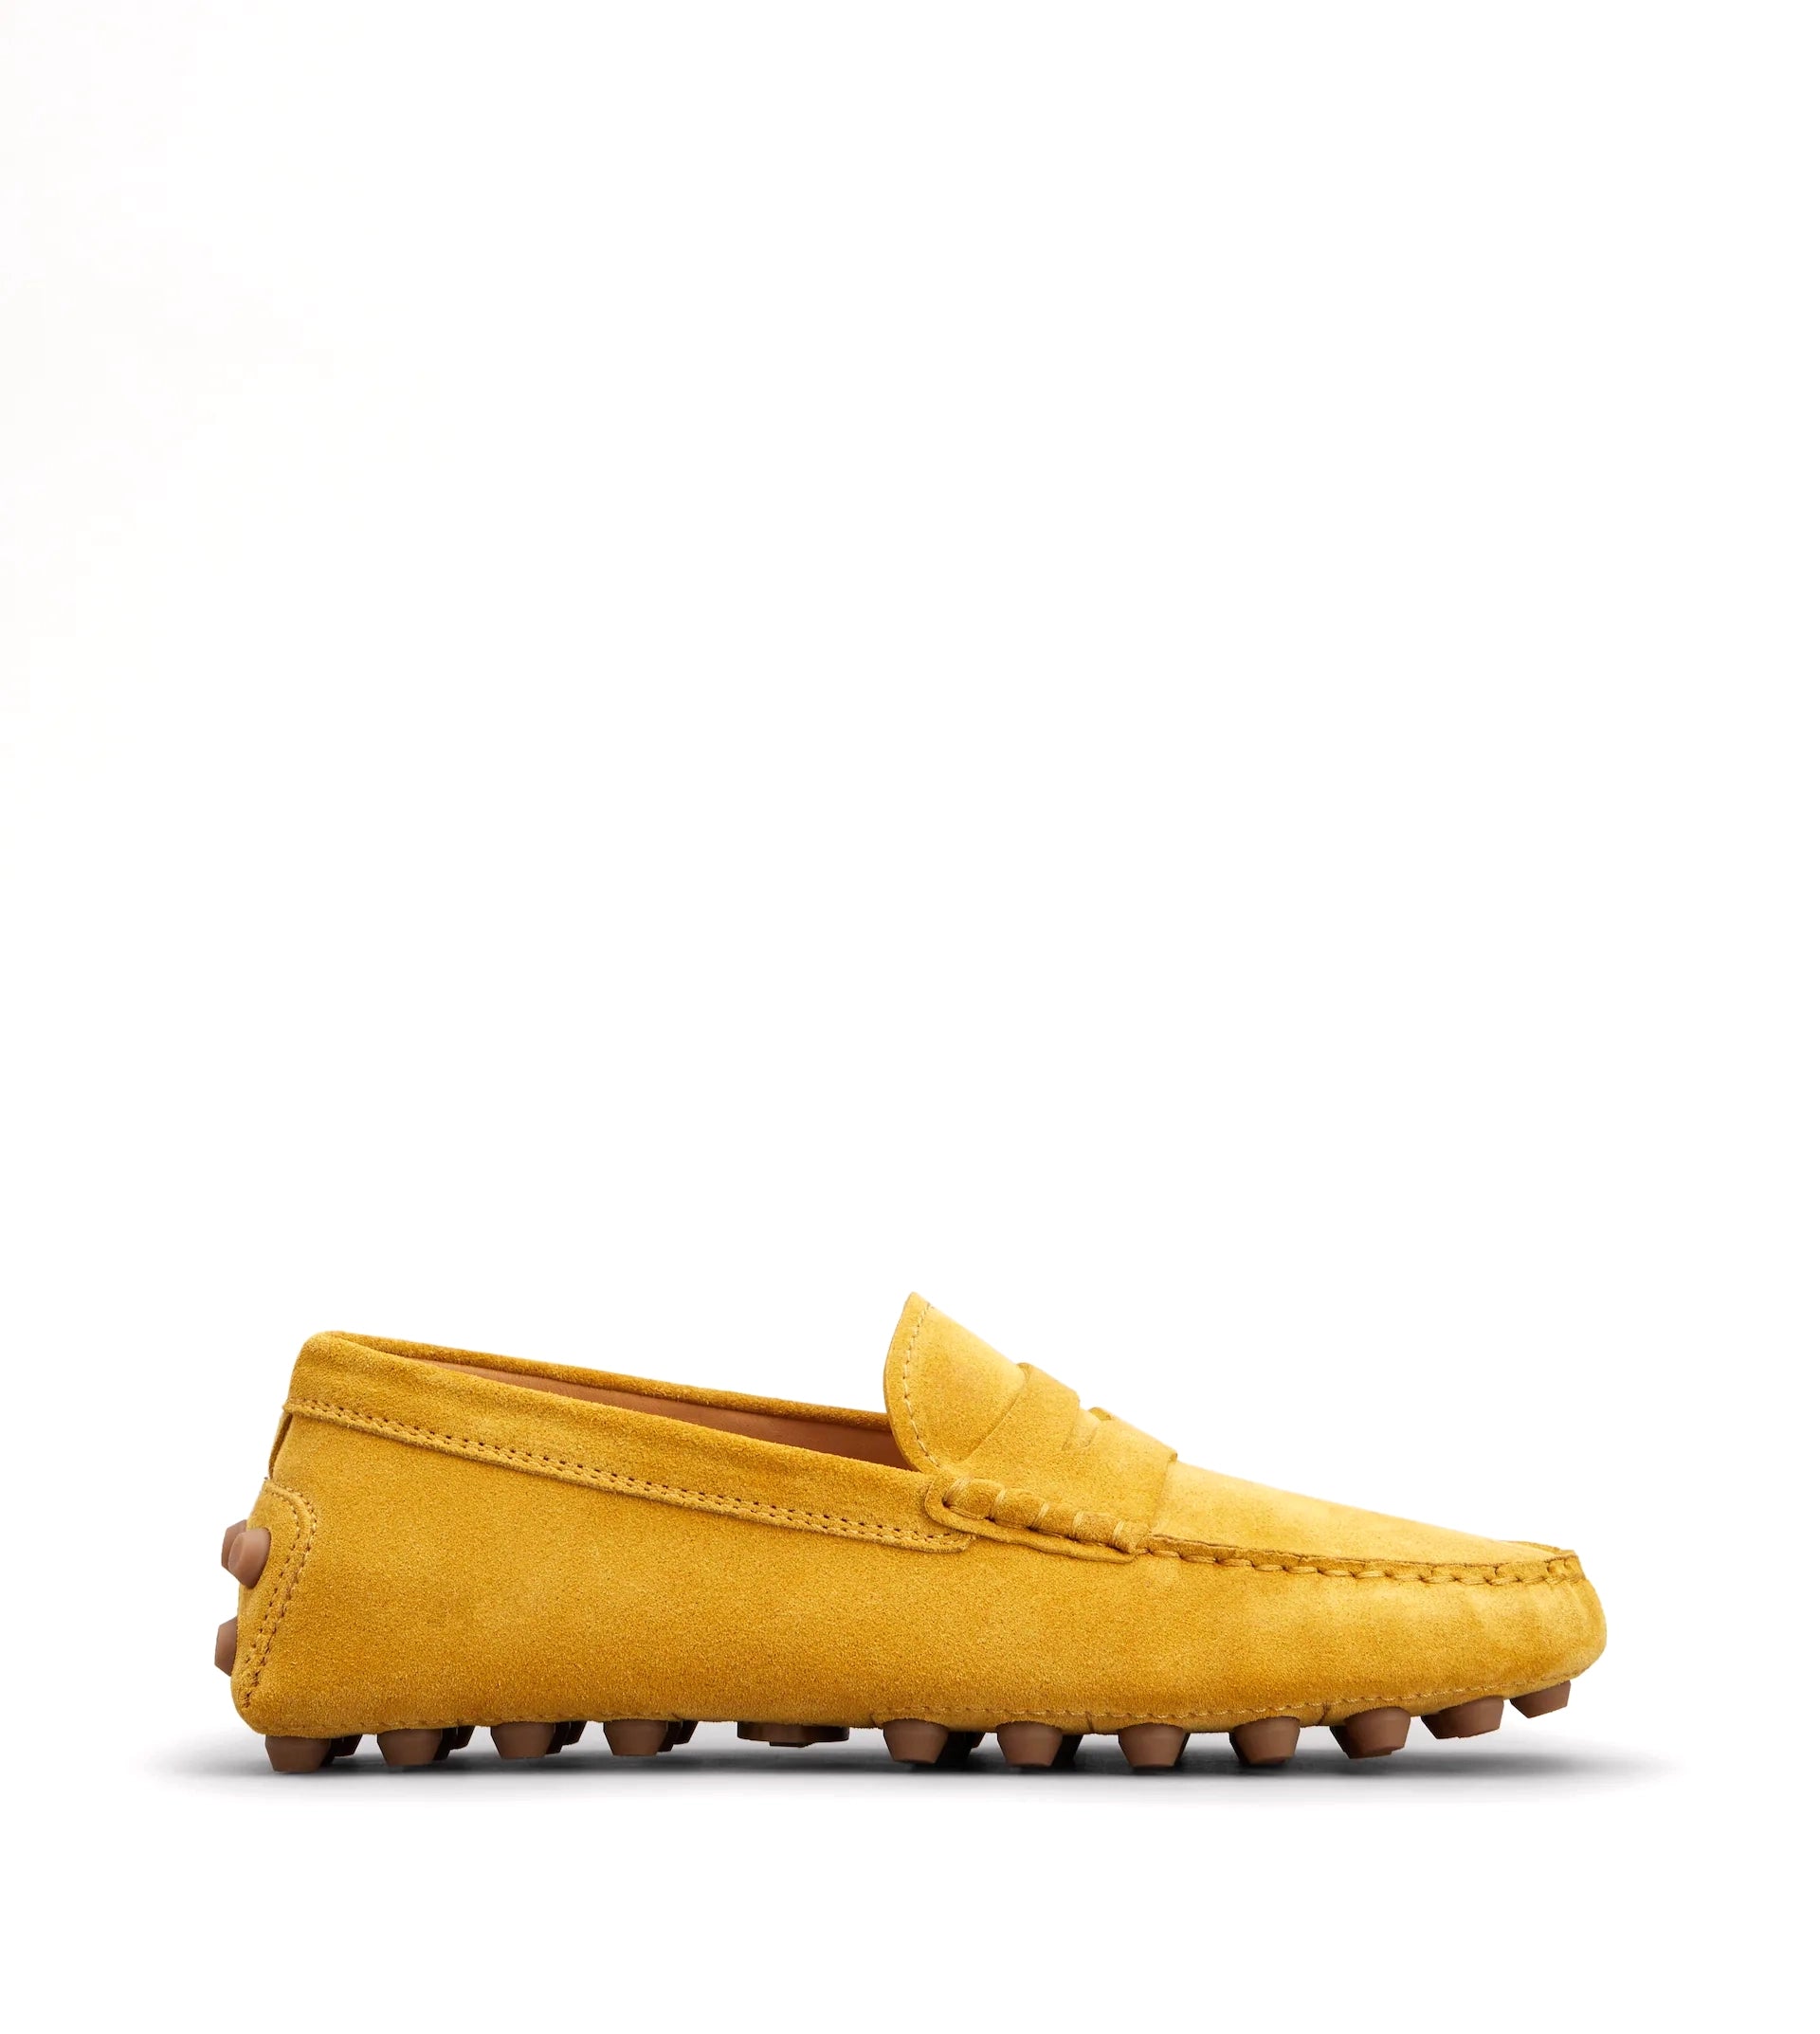 Suede Leather Loafer